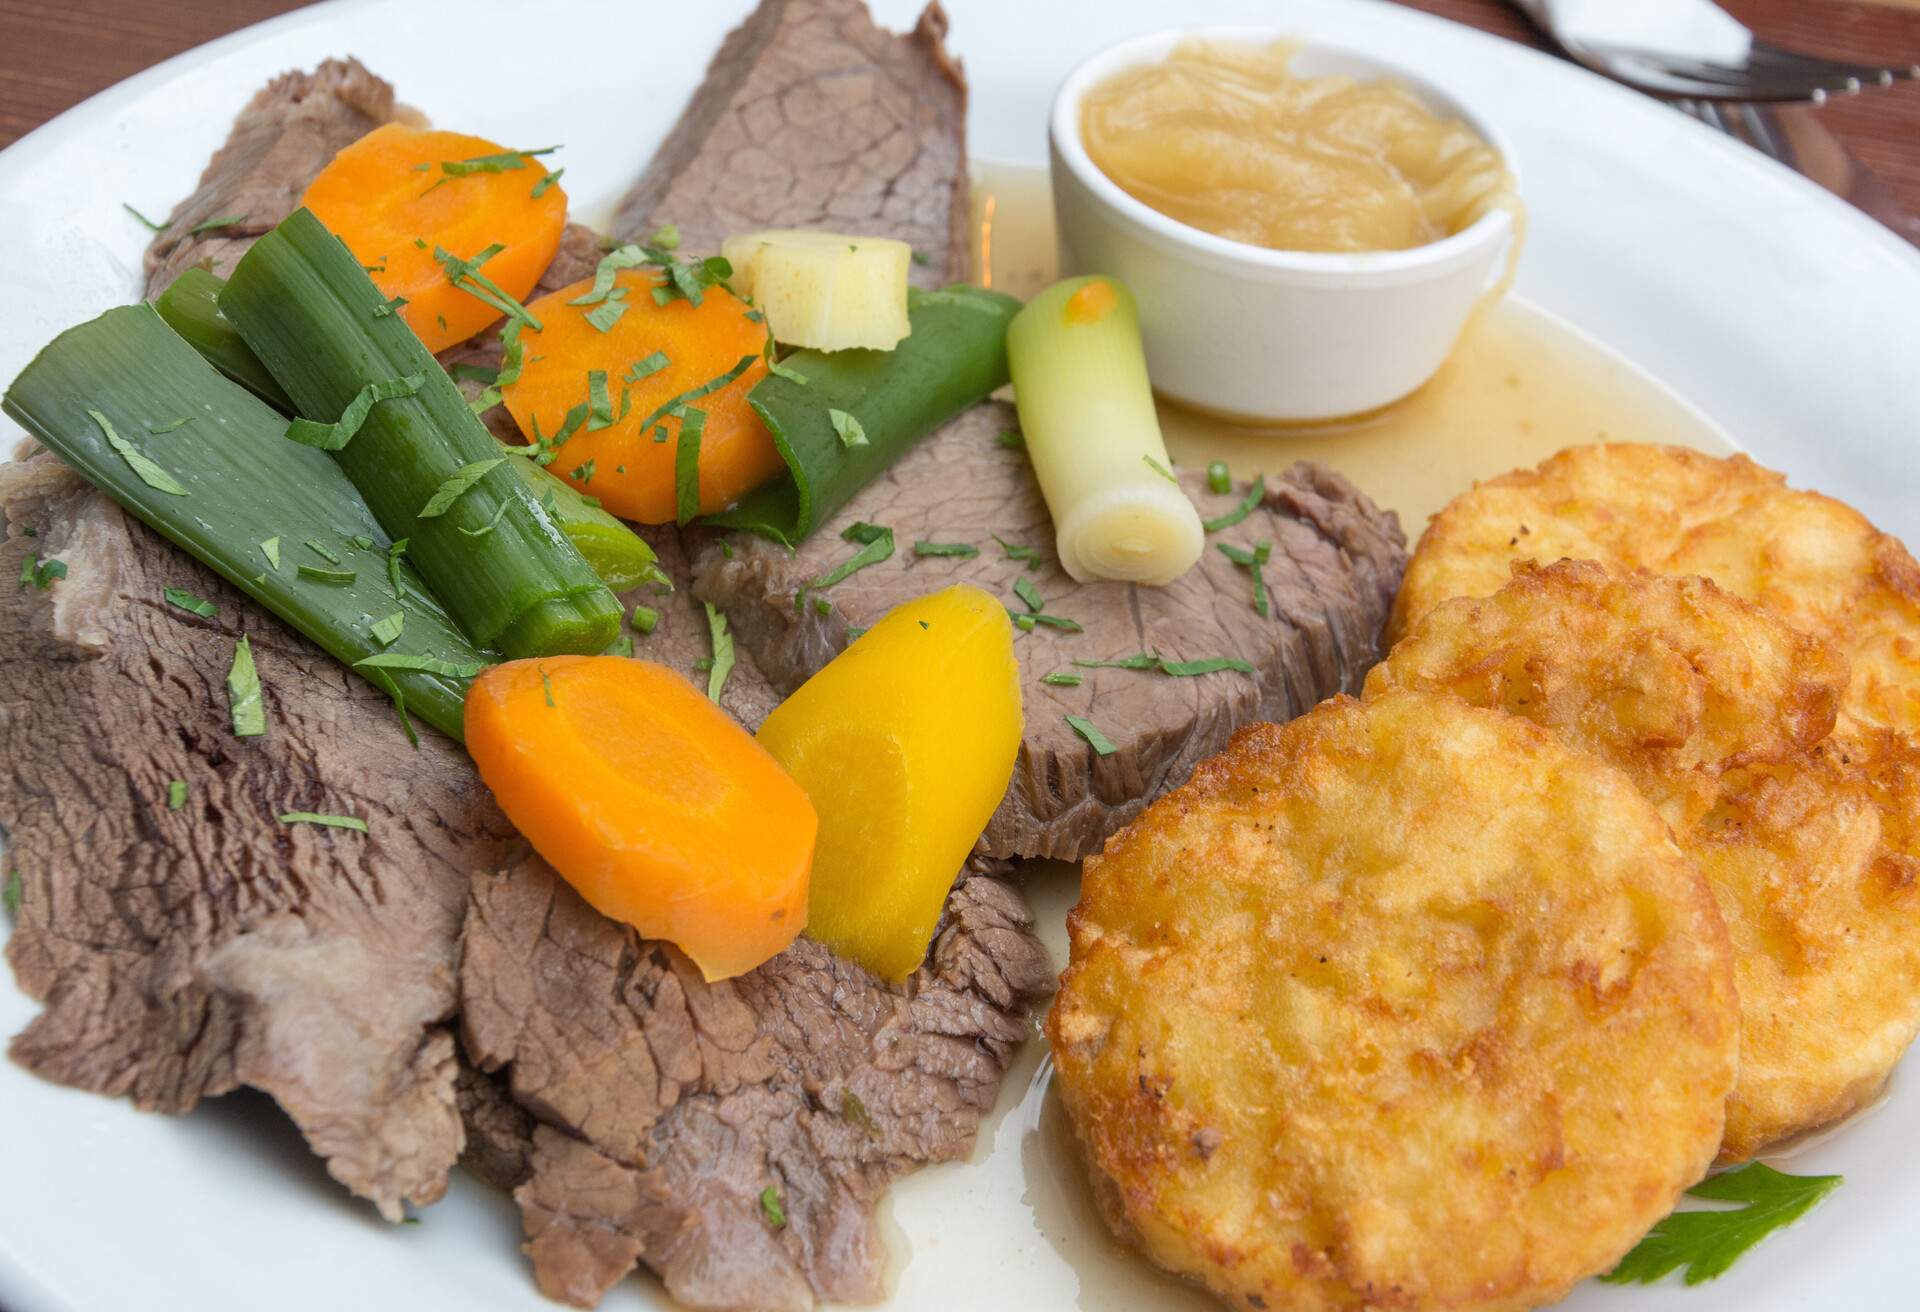 Tafelspitz (boiled filet of beef) with vegetables and fried potato cake, in Austria.